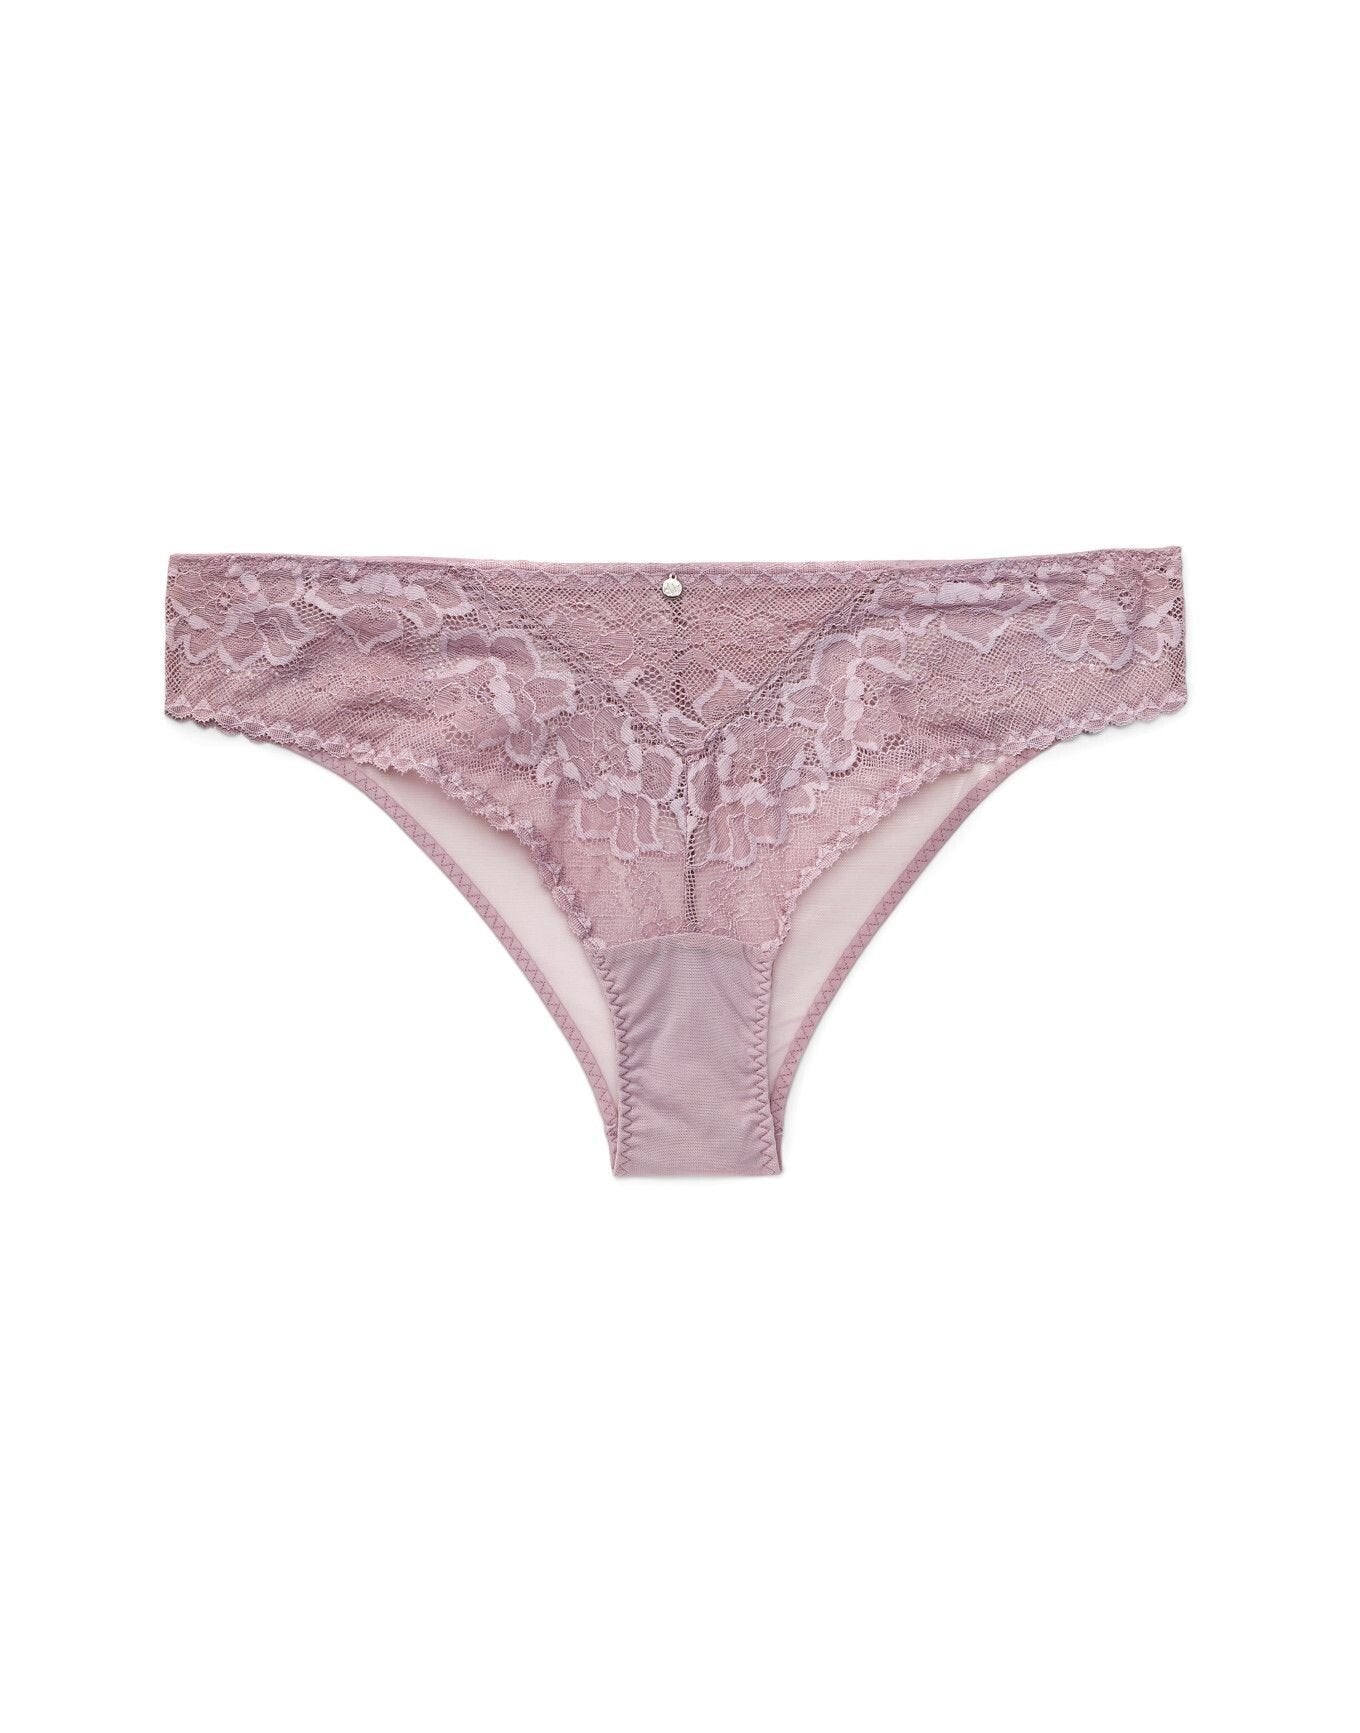 Adore Me Faira Cheeky in color Elderberry and shape cheeky